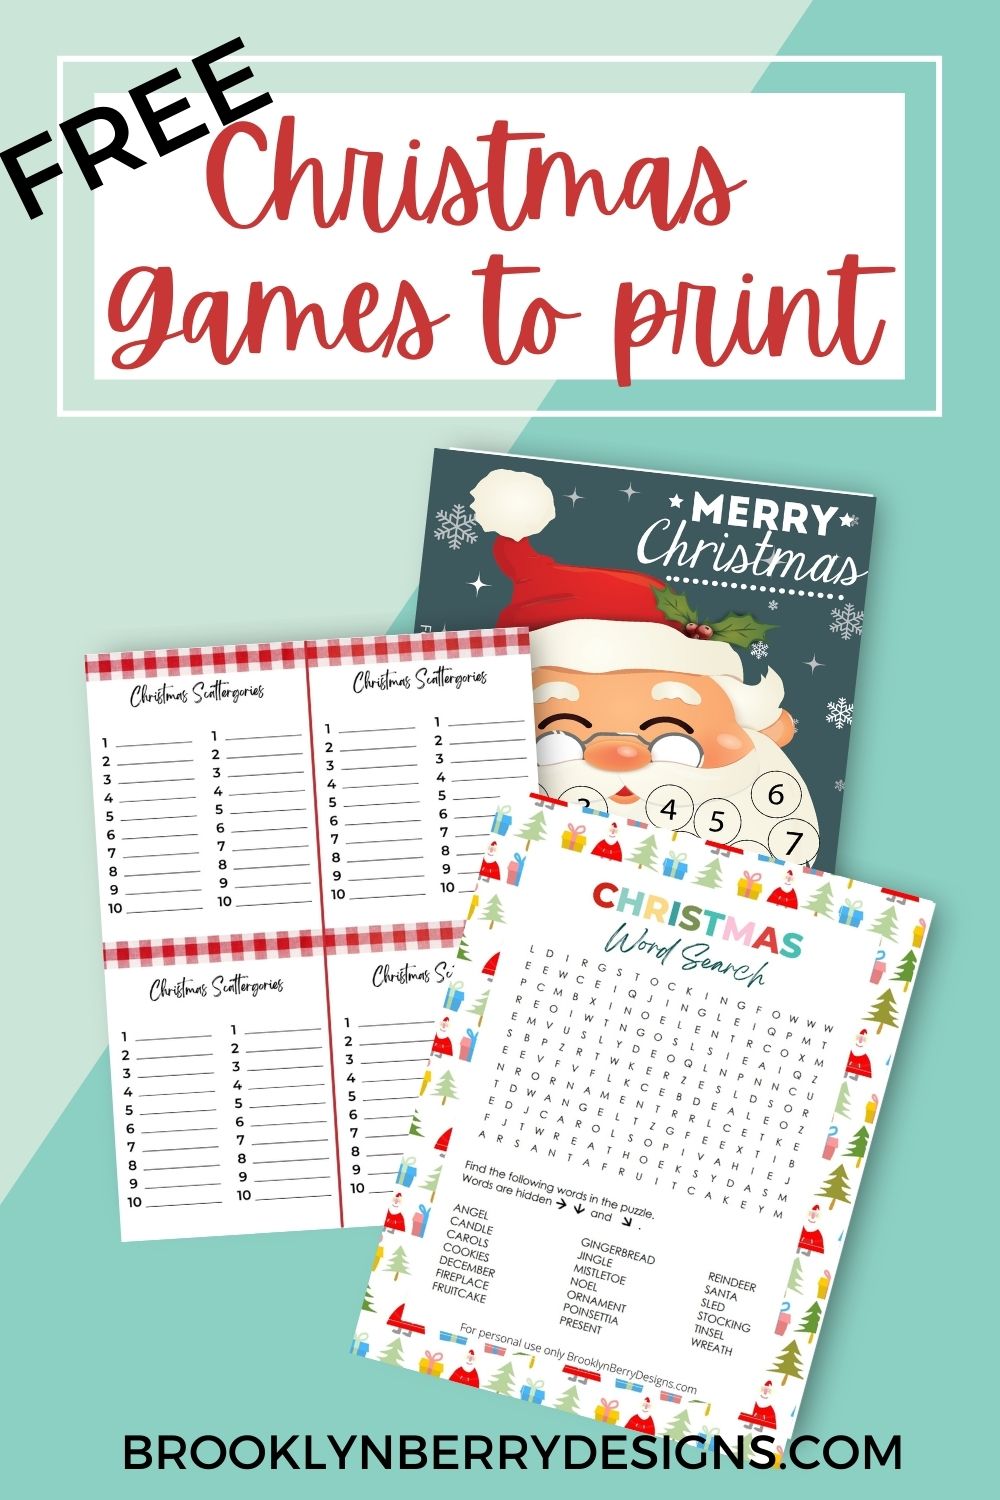 free Christmas games to print and enjoy this holiday season. Three papers are shown with printable scattergories, a word search, and santas beard advent activity.